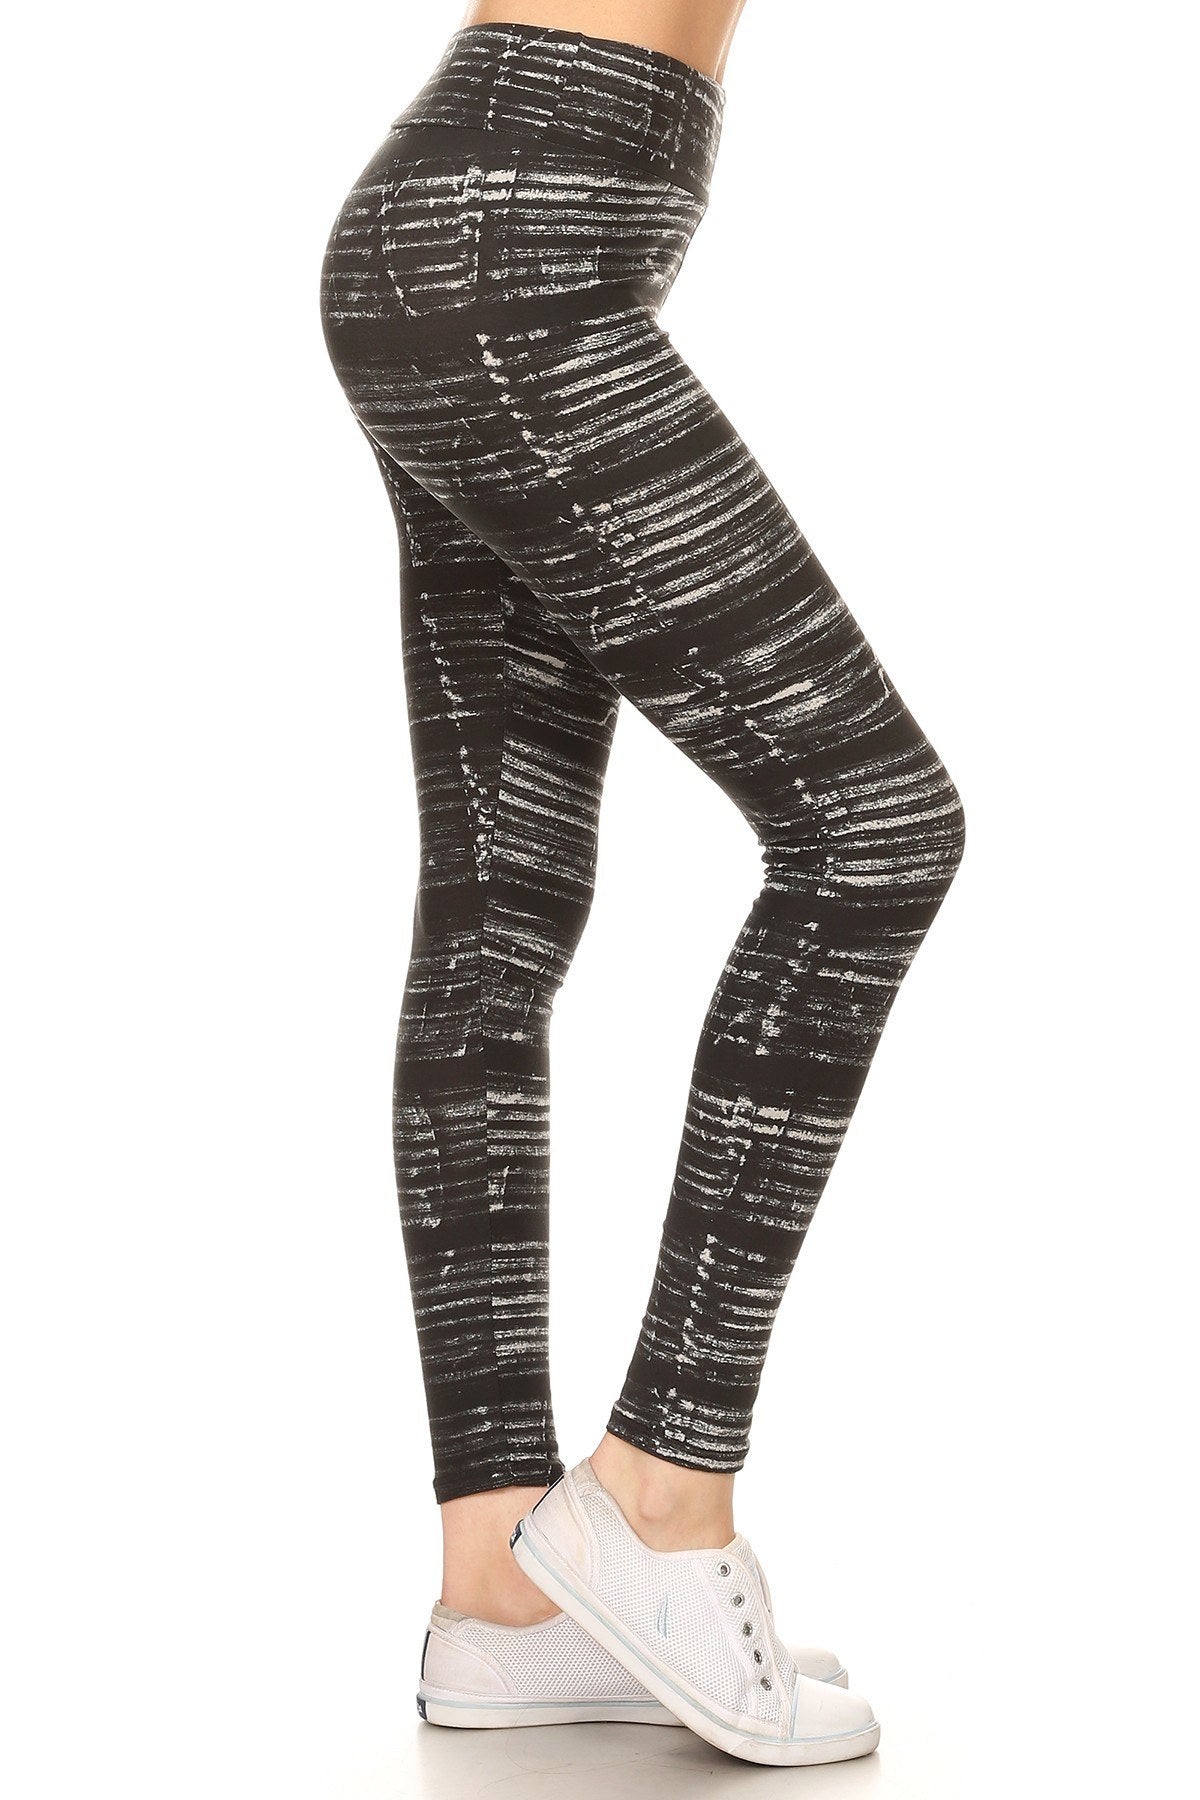 Yoga Style Banded Lined Multicolor Print, Full Length Leggings In A Slim Fitting Style With A Banded High Waist Sunny EvE Fashion